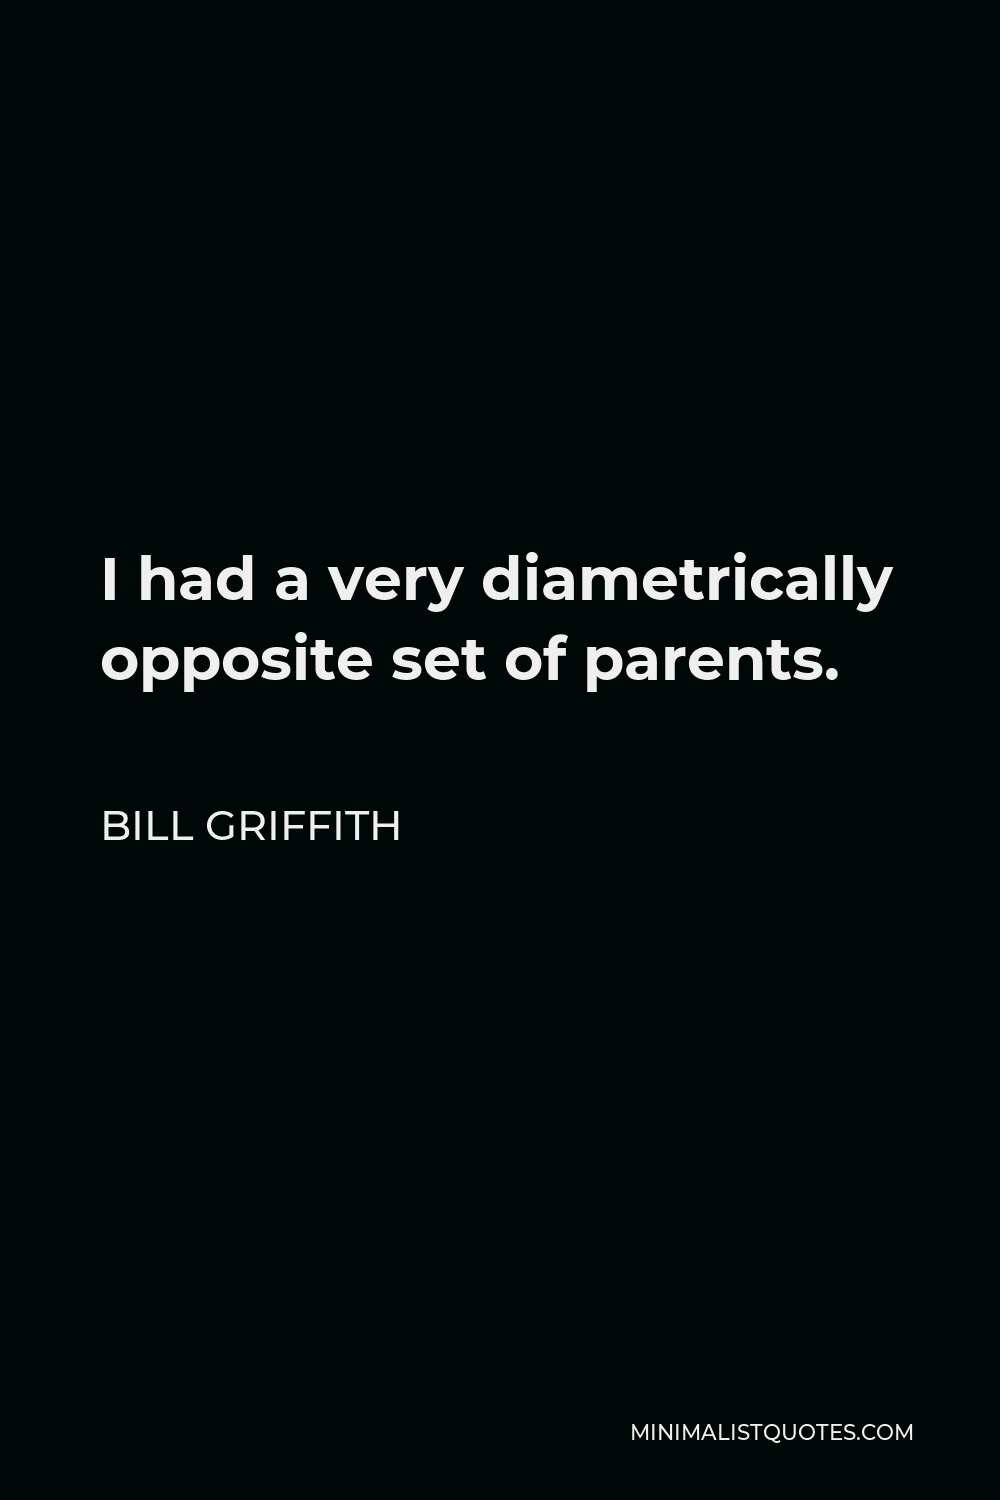 Bill Griffith Quote - I had a very diametrically opposite set of parents.